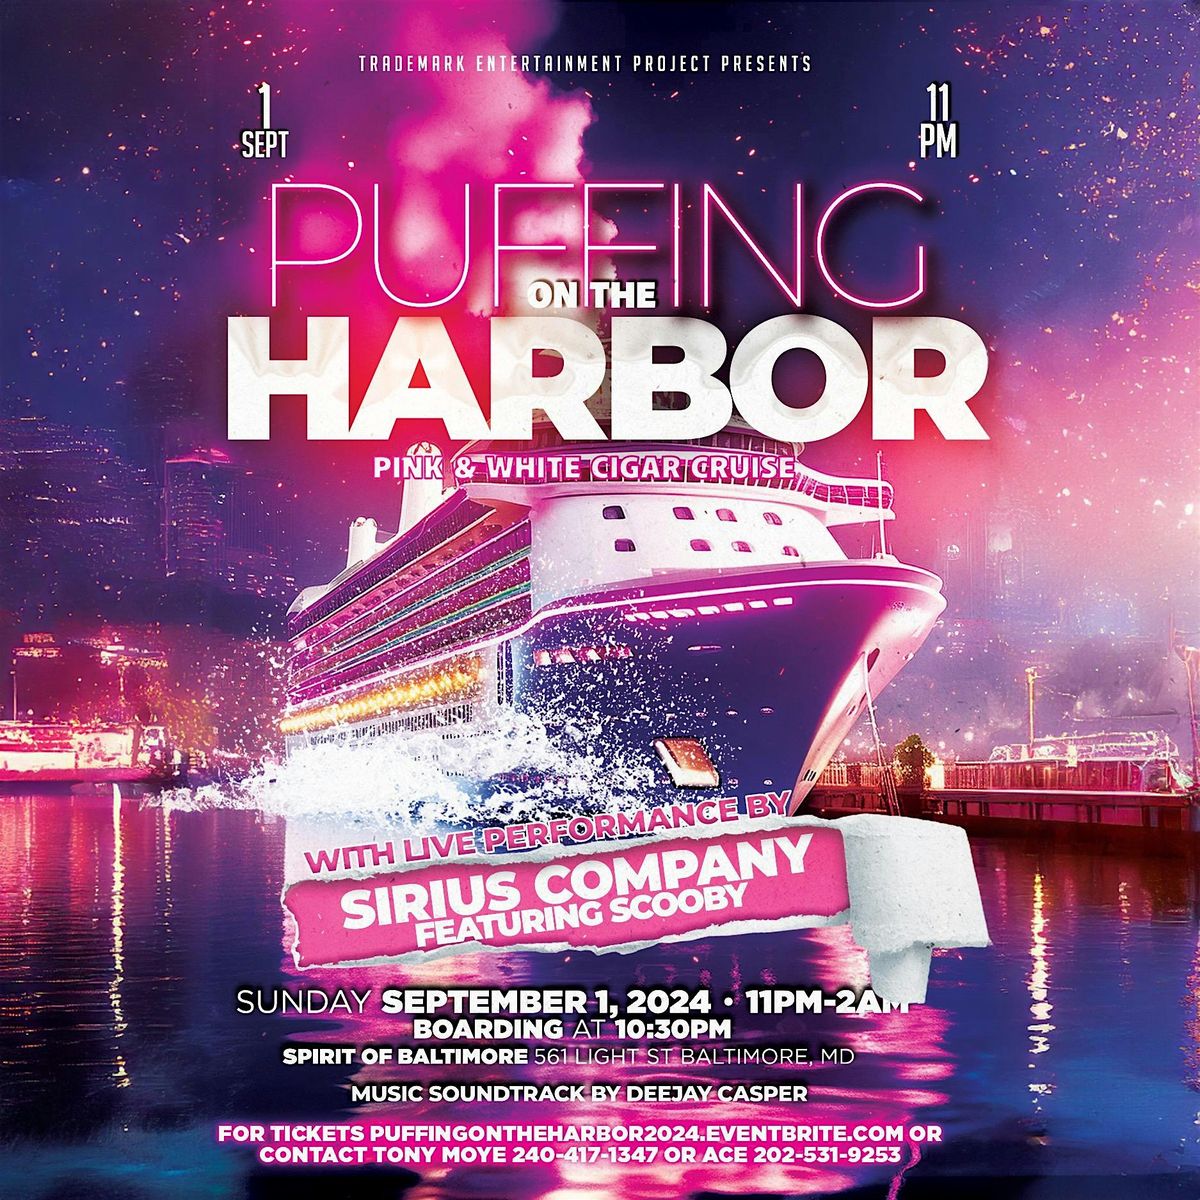 PUFFING ON THE HARBOR PINK & WHITE CIGAR CRUISE